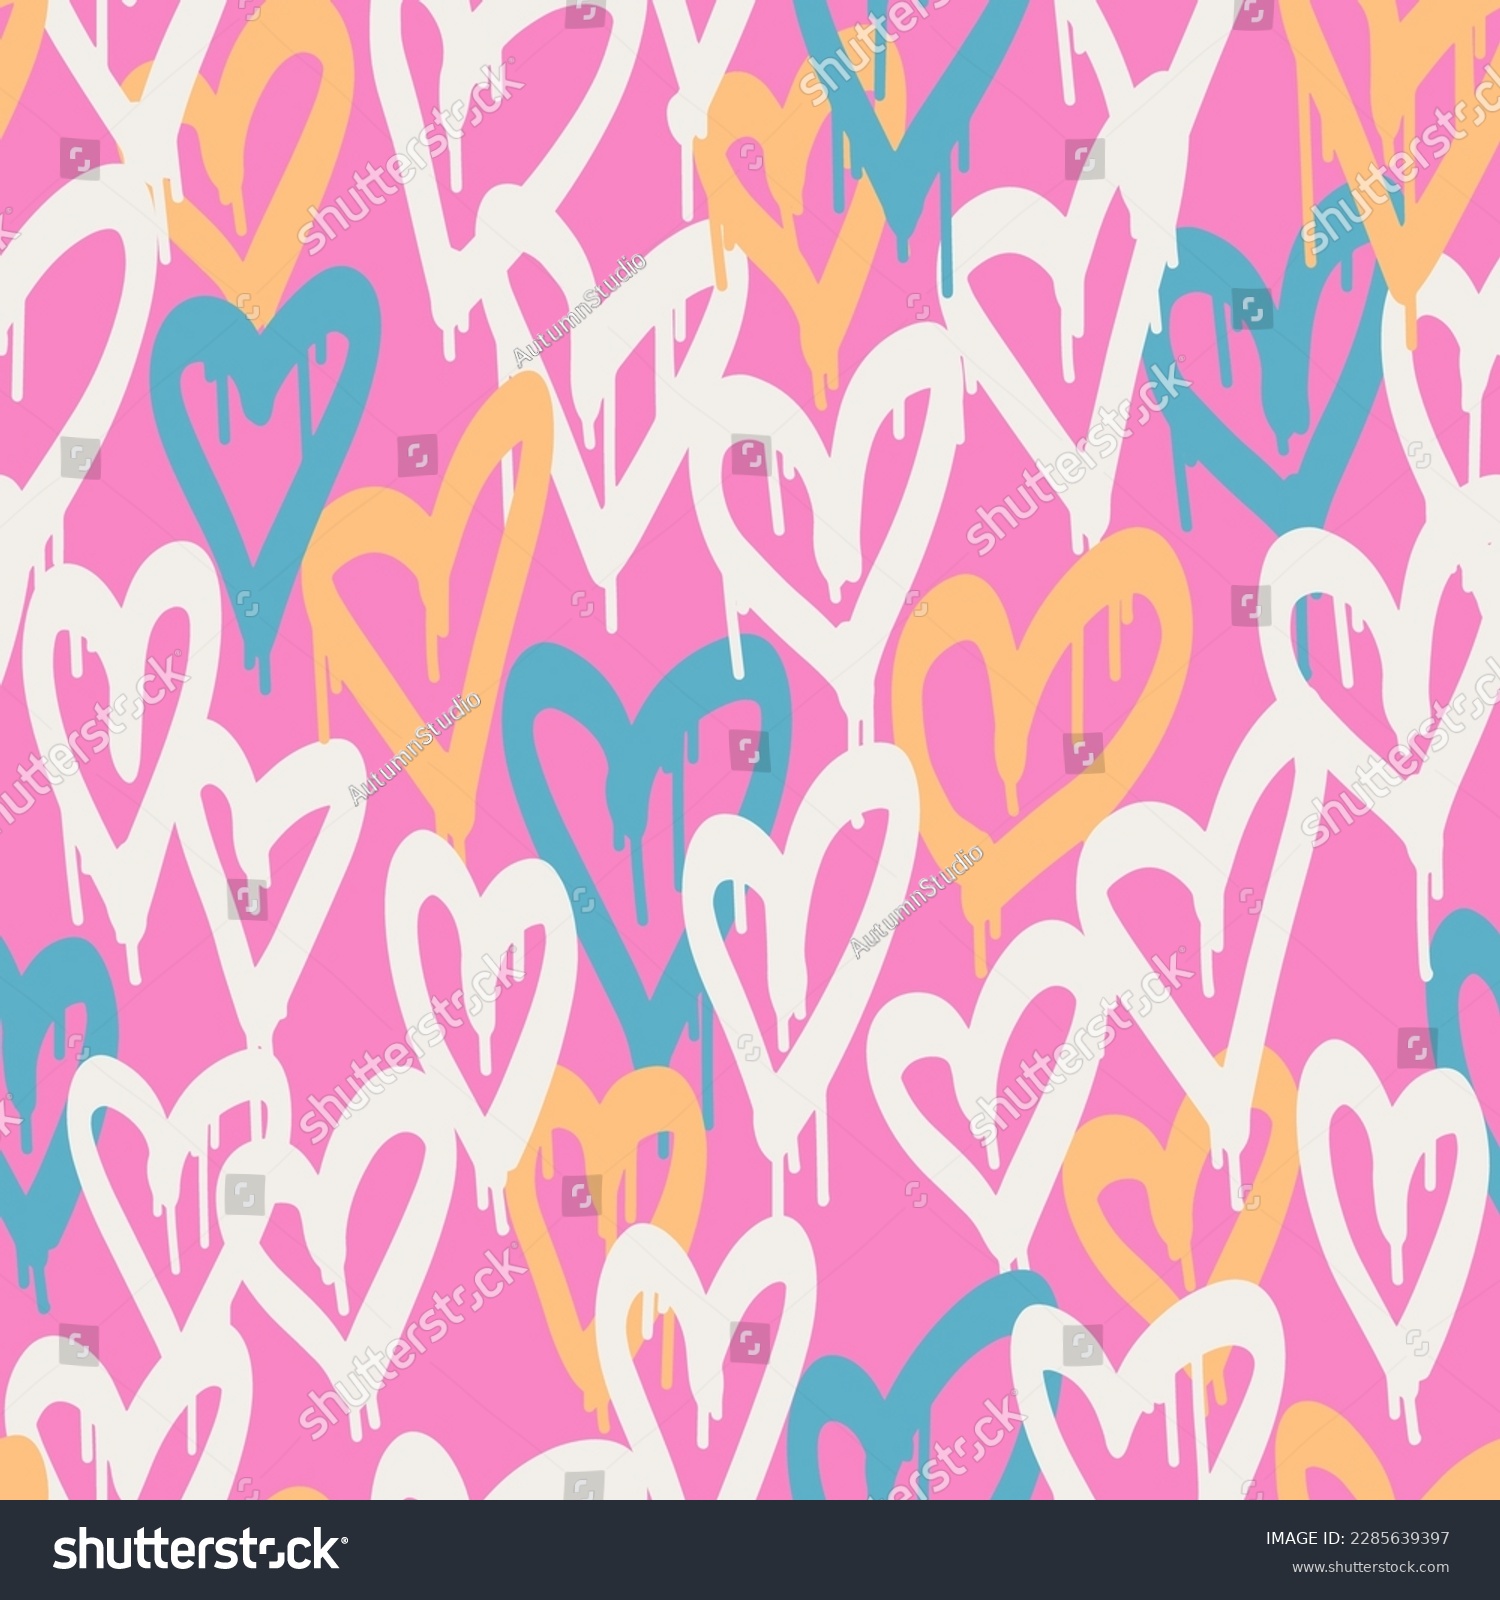 SVG of Graffiti hearts. Urban seamless pattern in street art style. Abstract print. Graphic underground unisex design for t-shirts and sweatshirt in bright neon pink colors. Hipster retrowave with 90s style. svg